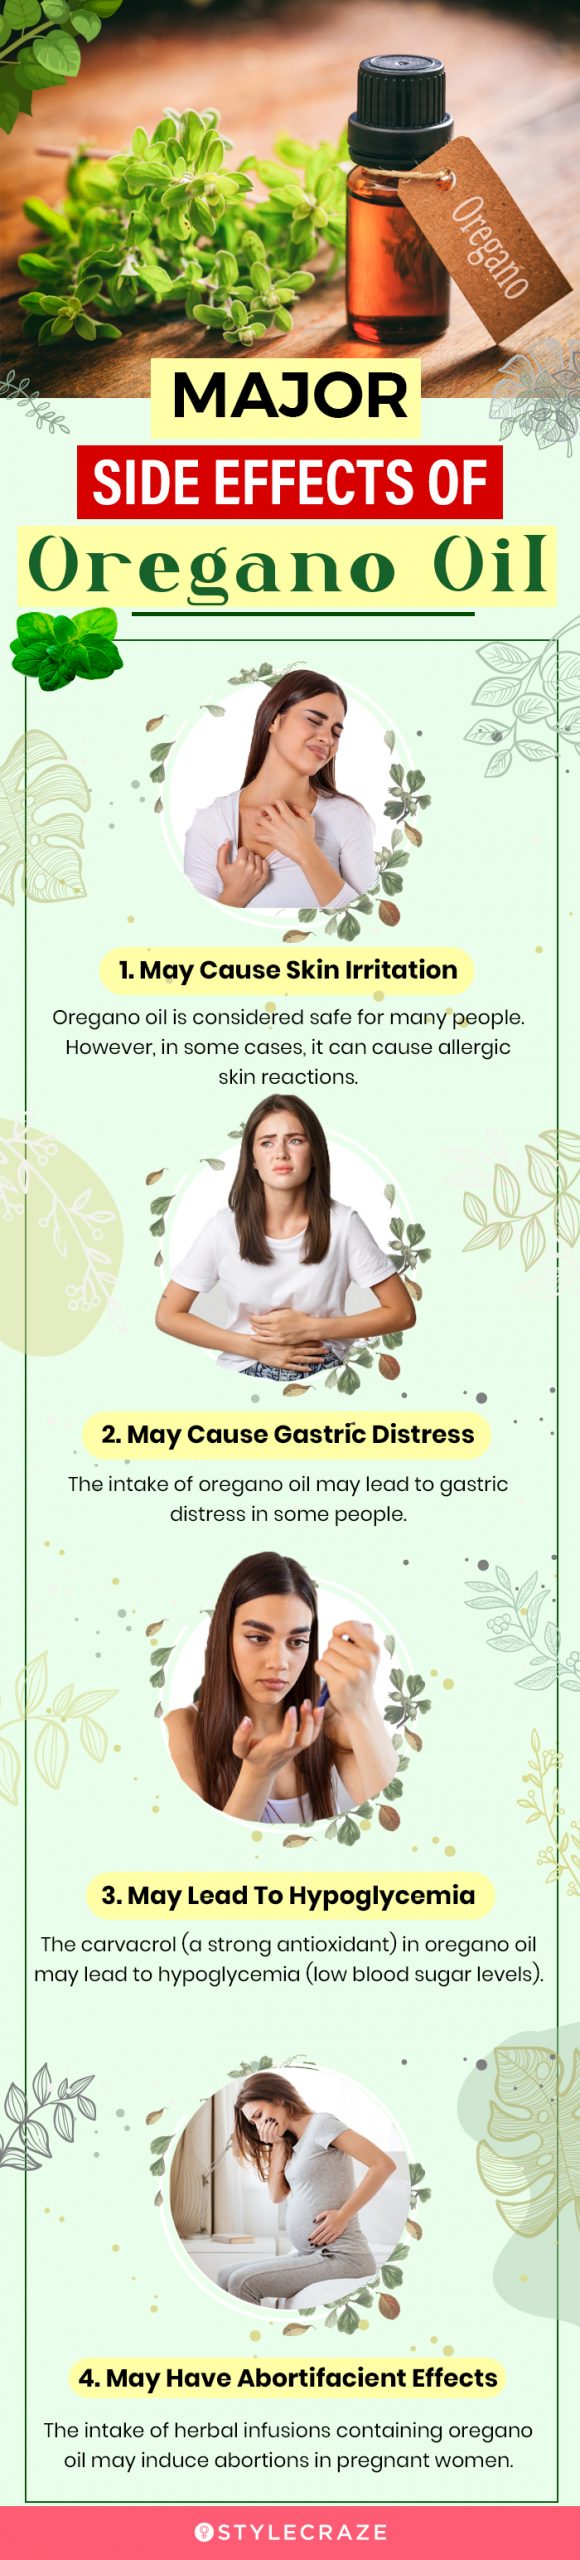 major side effects of oregano oil [infographic]